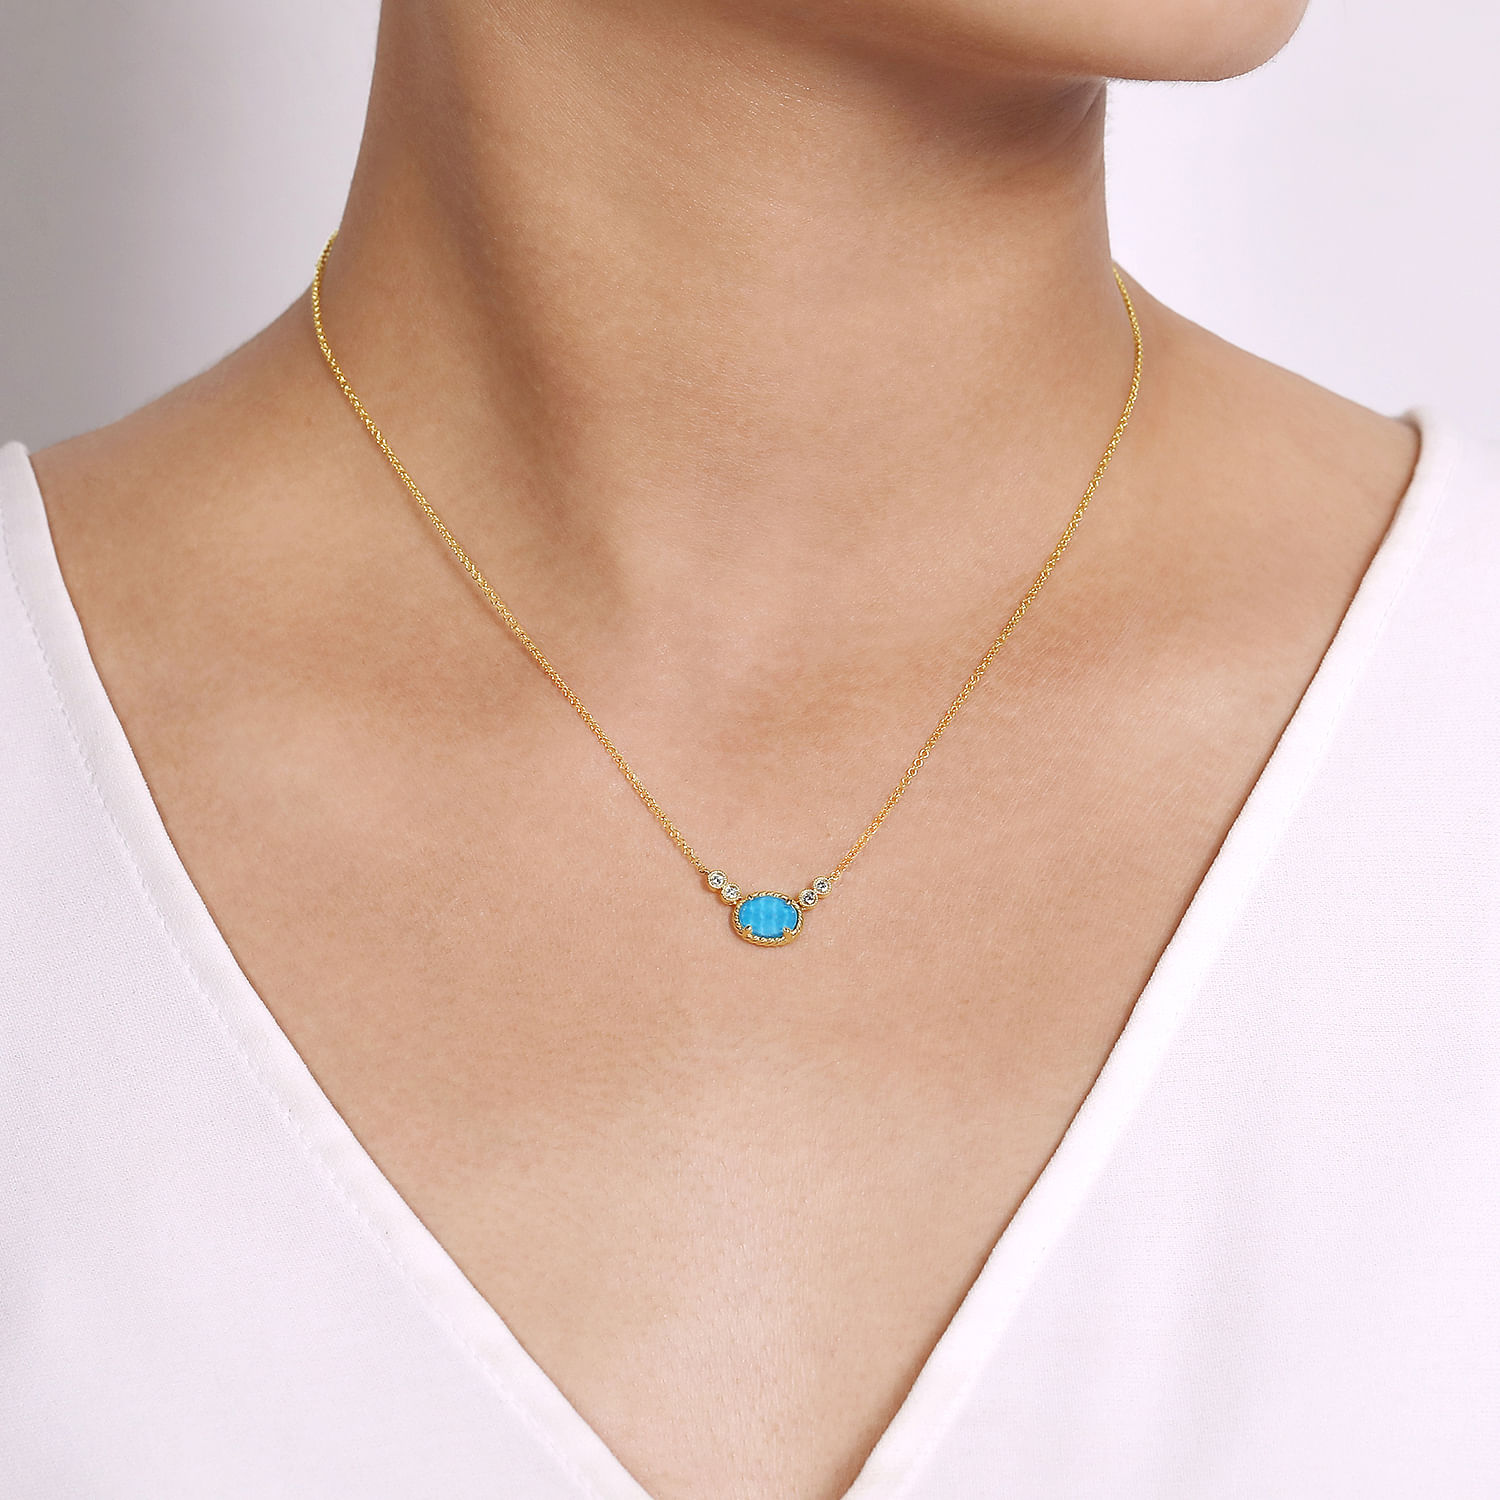 14K Yellow Gold Oval Rock Crystal/Turquoise and Diamond Pendant Necklace